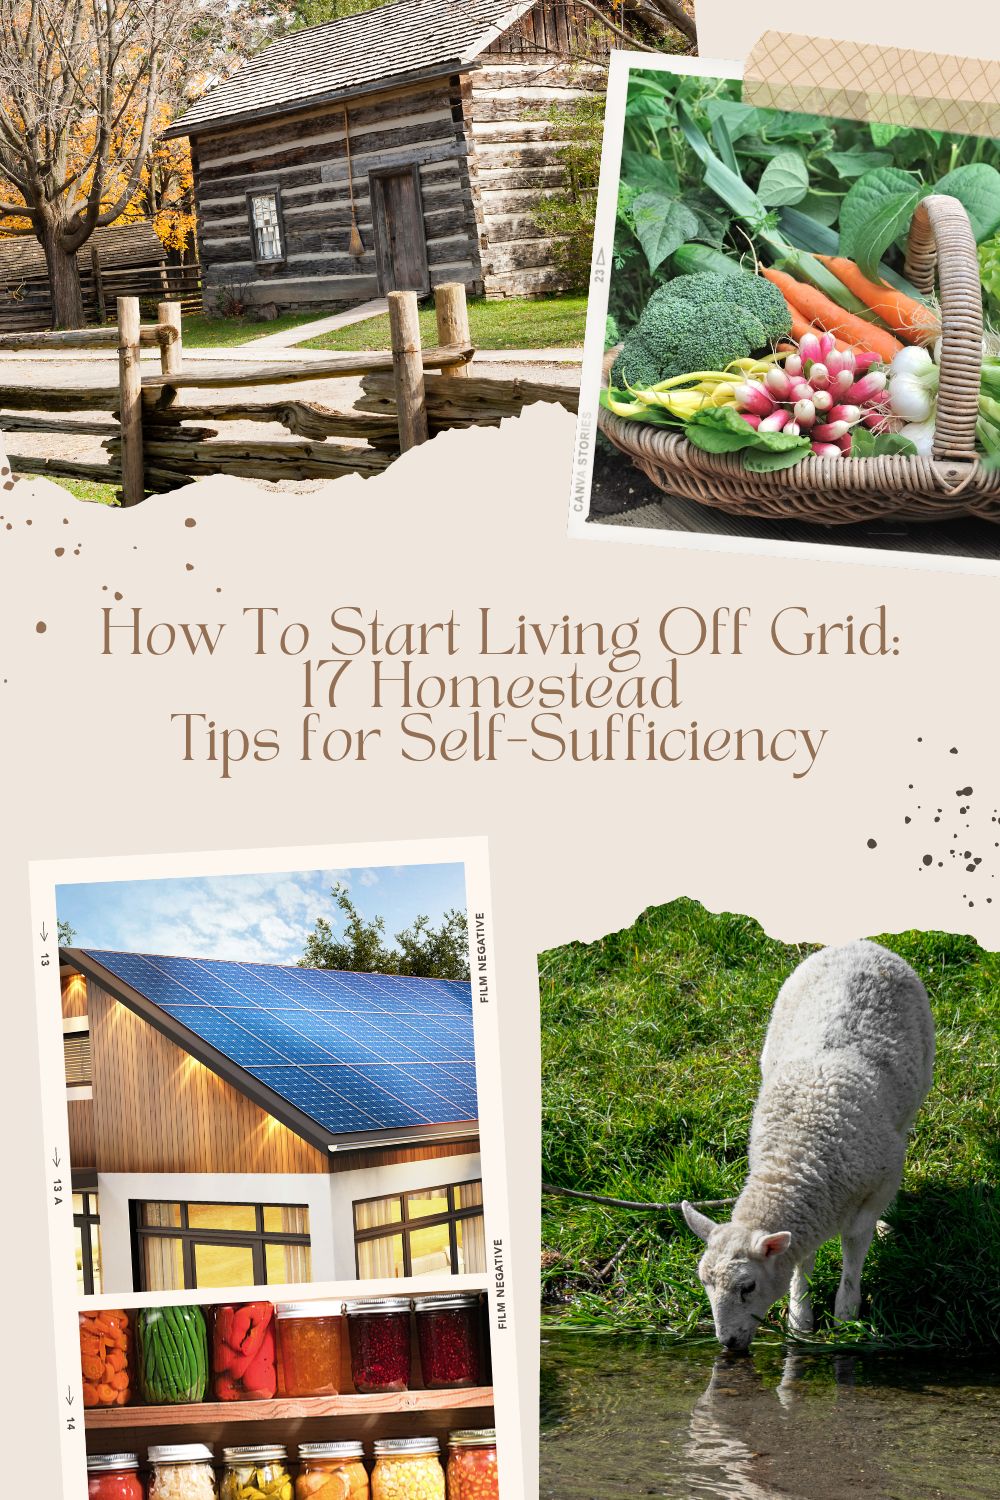 Various images of an off grid farmhouse, solar panels on a roof, a sheep drinking from a stream and fresh vegetables.